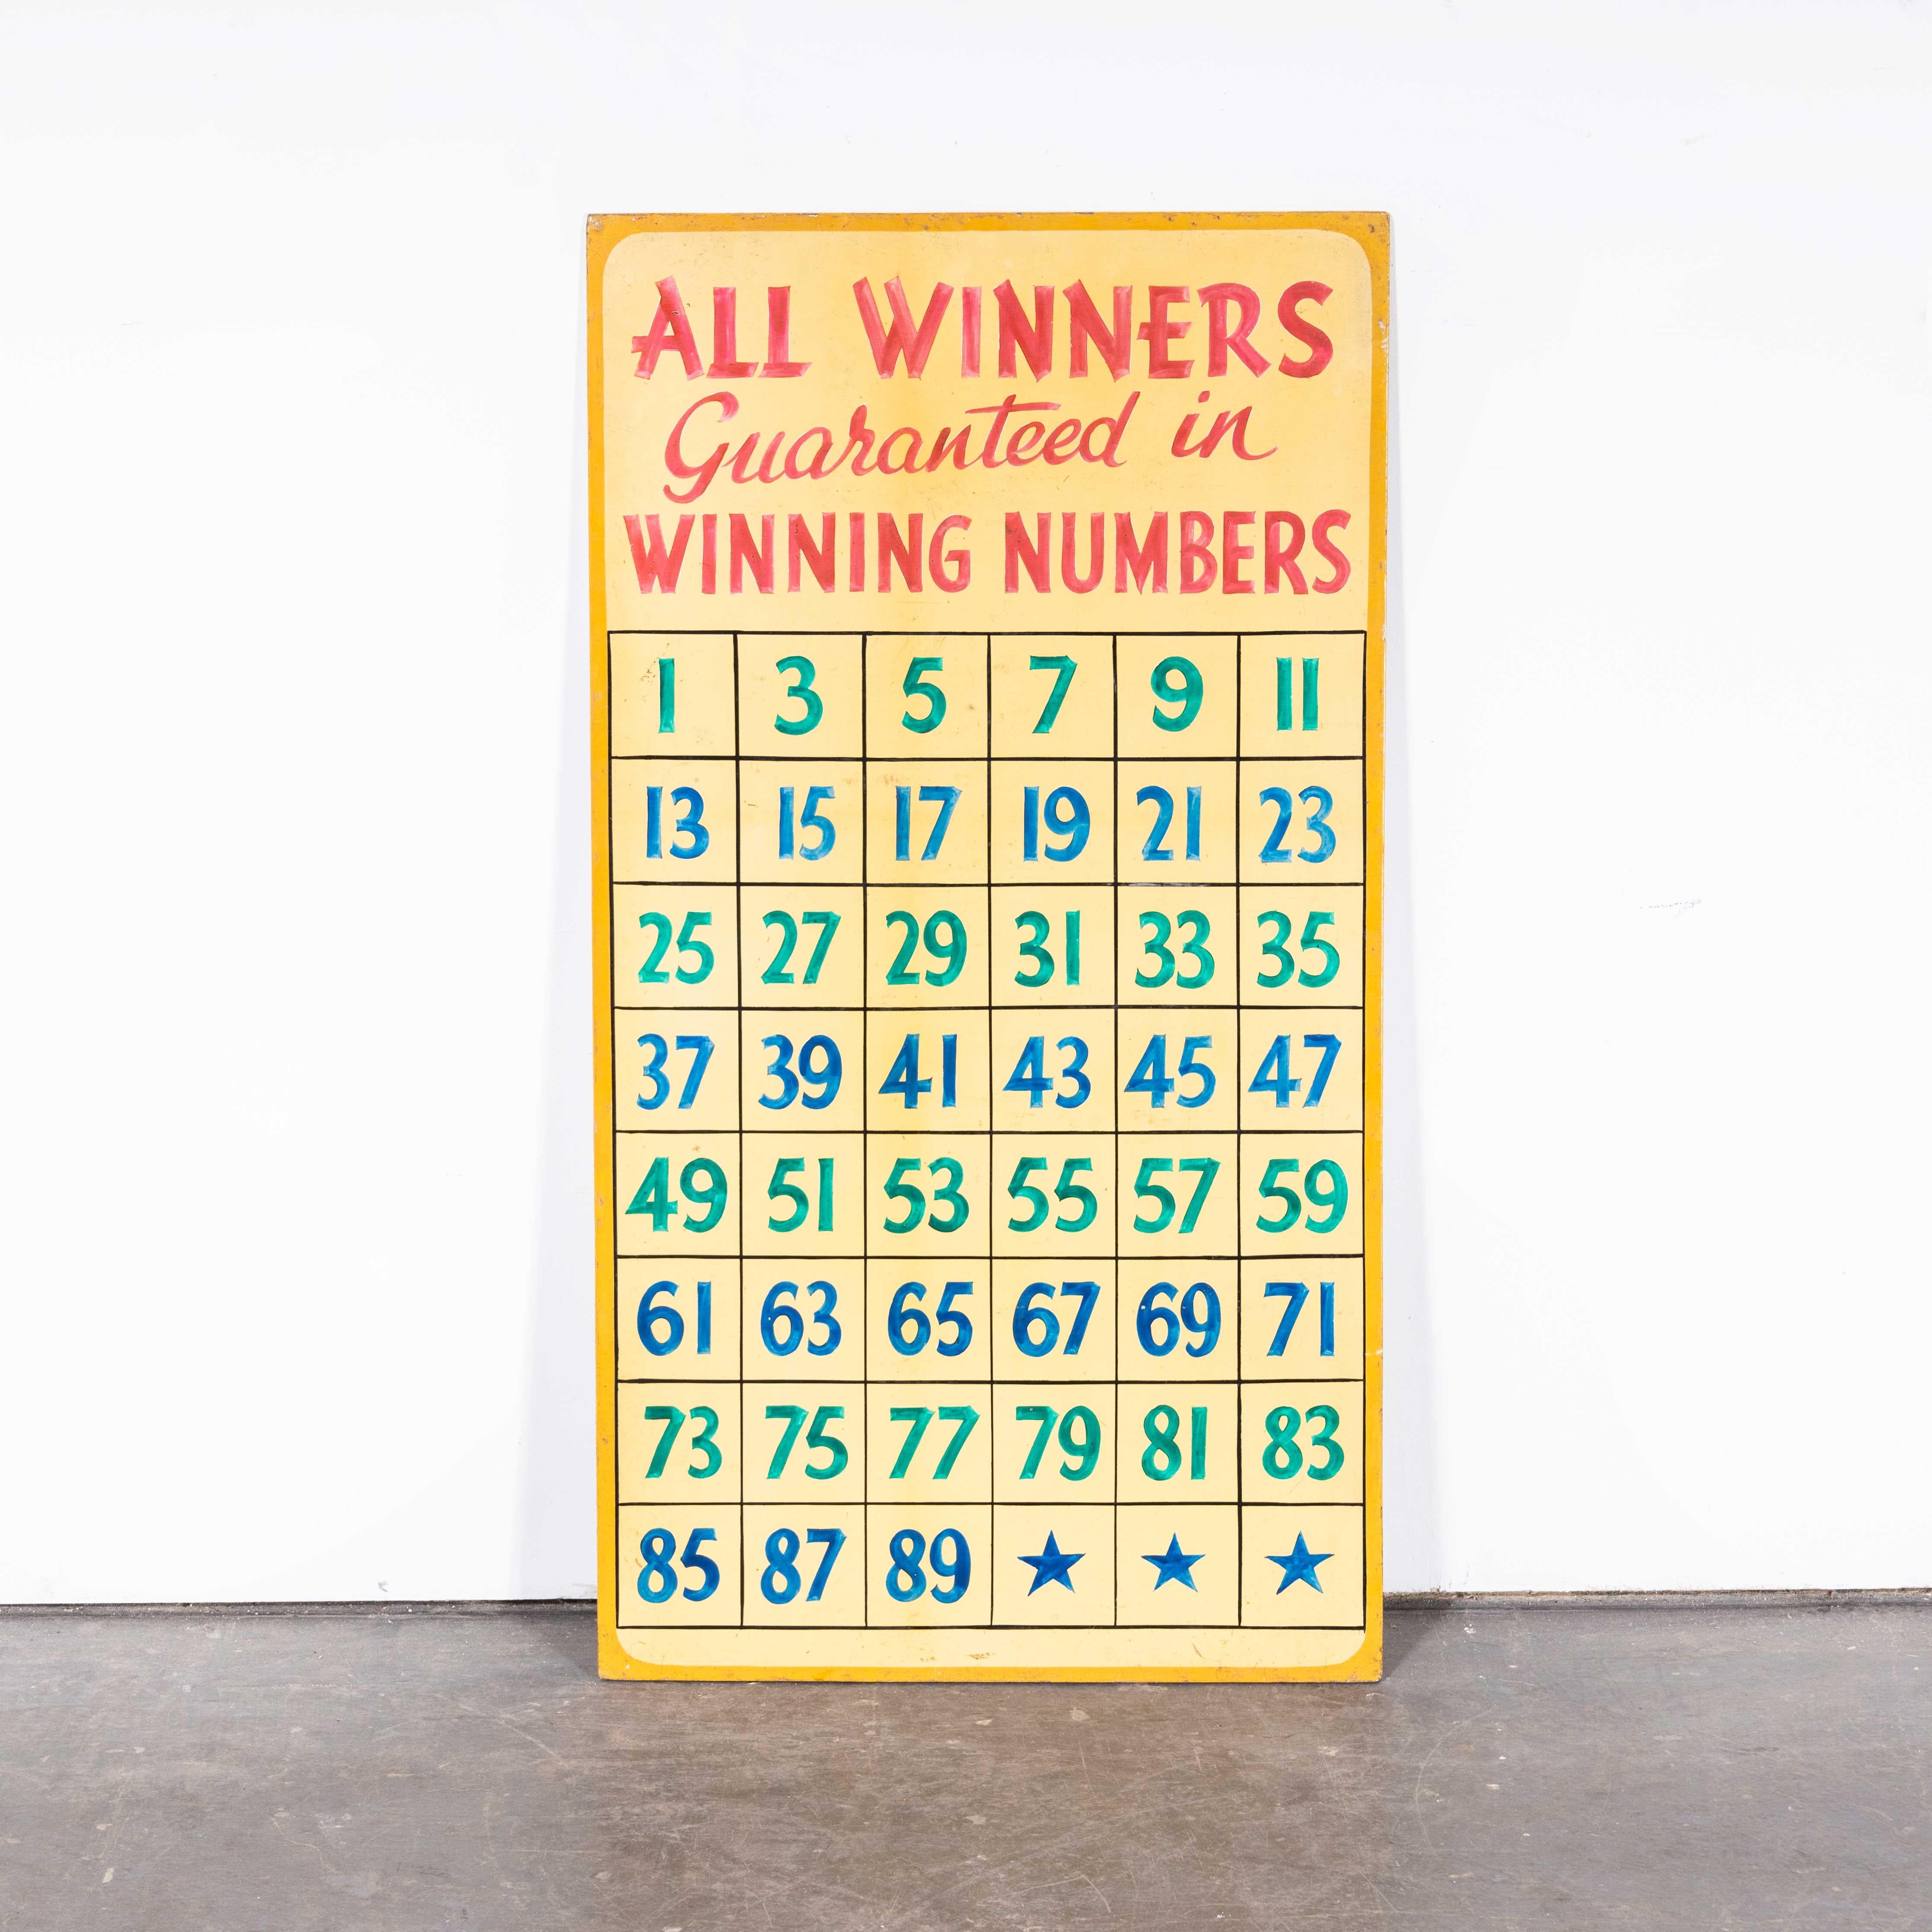 1950s Original All Winners Large Fairground Sign (2556)
1950s Original All Winners Large Fairground Sign. Lovely honest and original fairground sign mounted on wooden board and hand painted.

WORKSHOP REPORT
Our workshop team inspect every